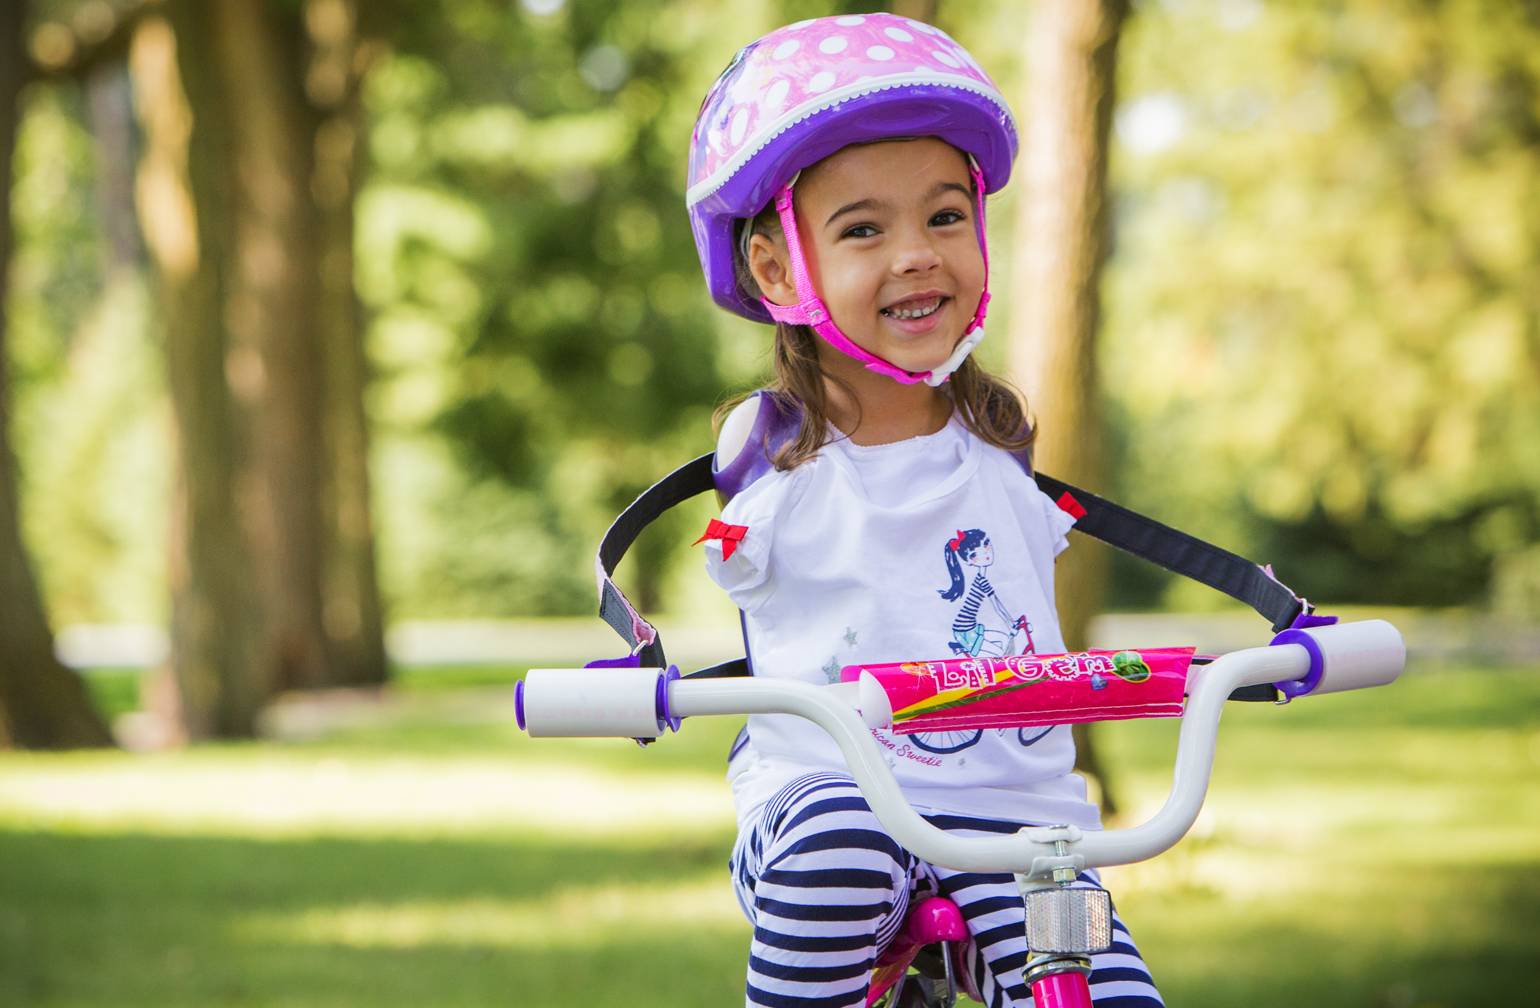 Ruth Evelyn, Gillette Children's patient who was born without arms poses with her bike